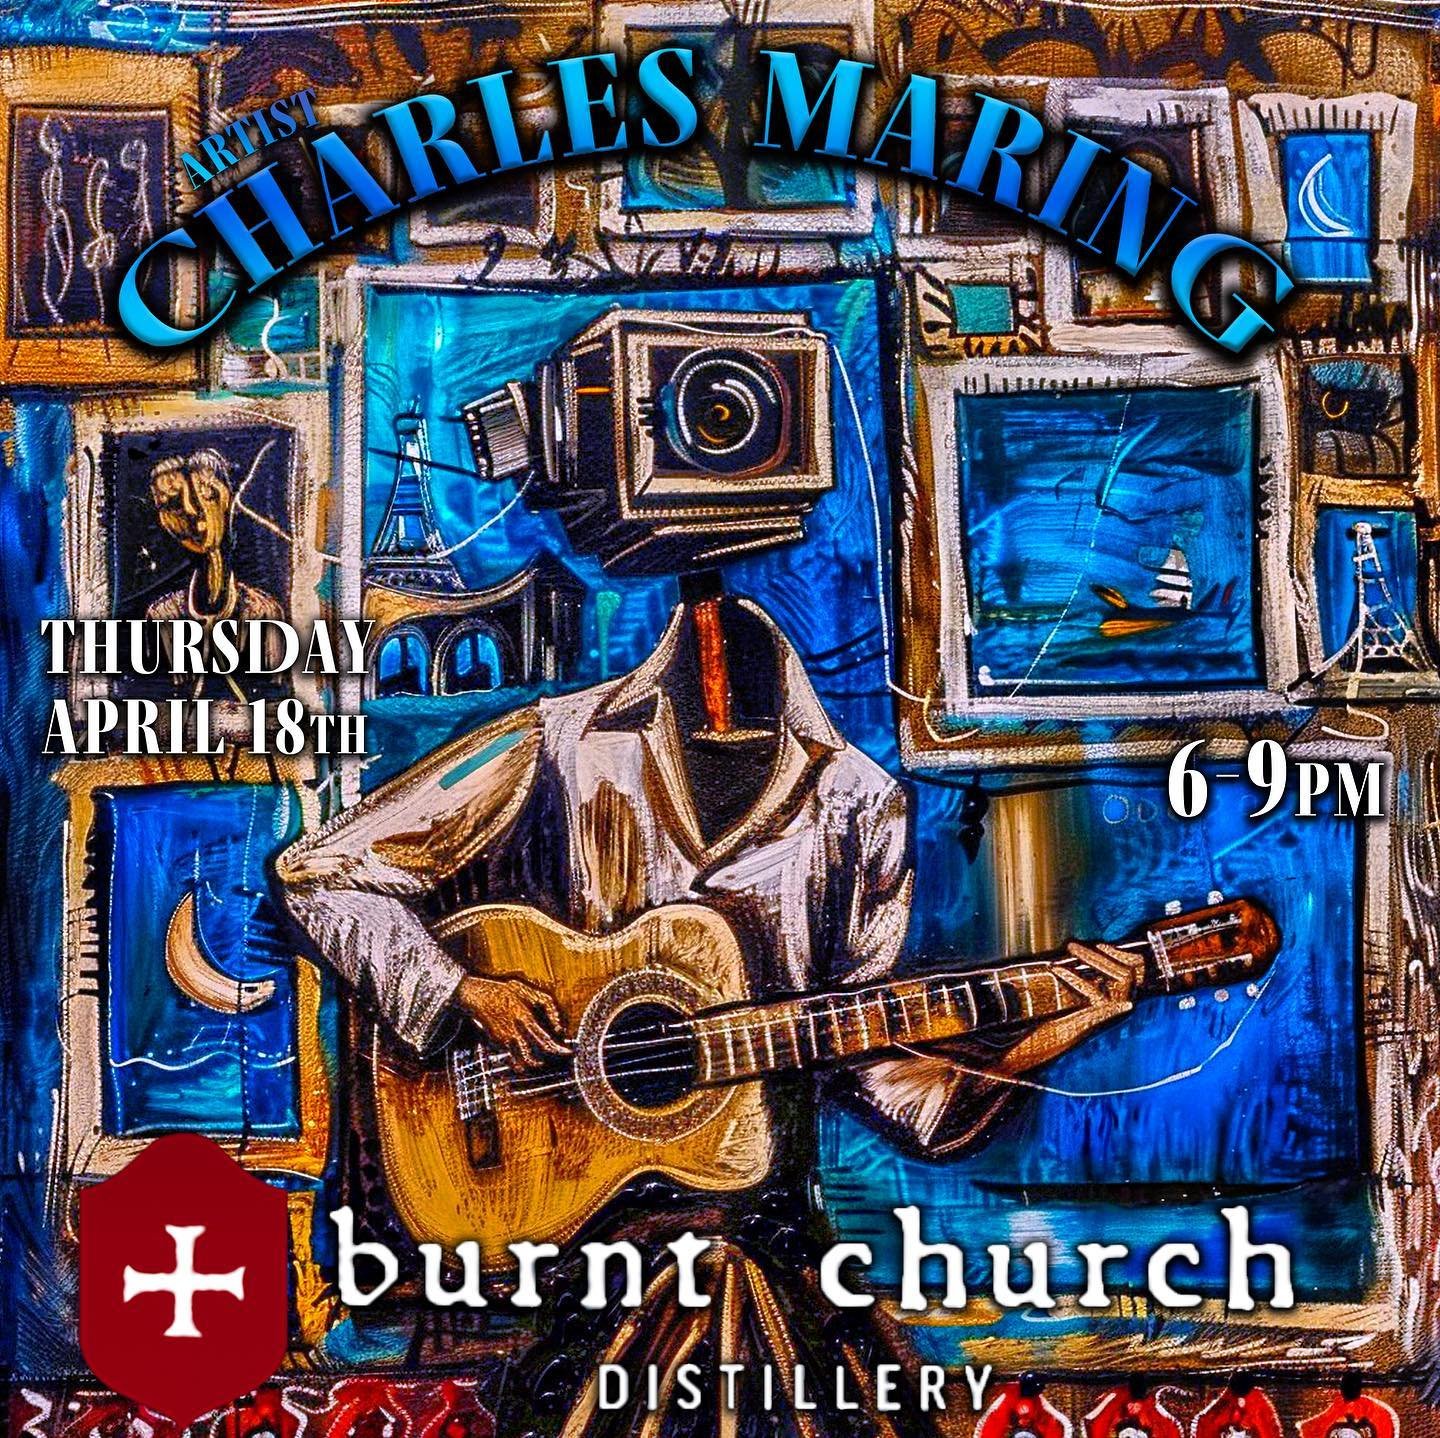 I&rsquo;m performing at @burntchurchdistillery tonight from 6-9 filling in for a fellow musician. Great spot! 🥃 🍸 🍹 🎶 Y&rsquo;all come out and get your groove on. Stage is set for a beautiful evening in #blufftonsc